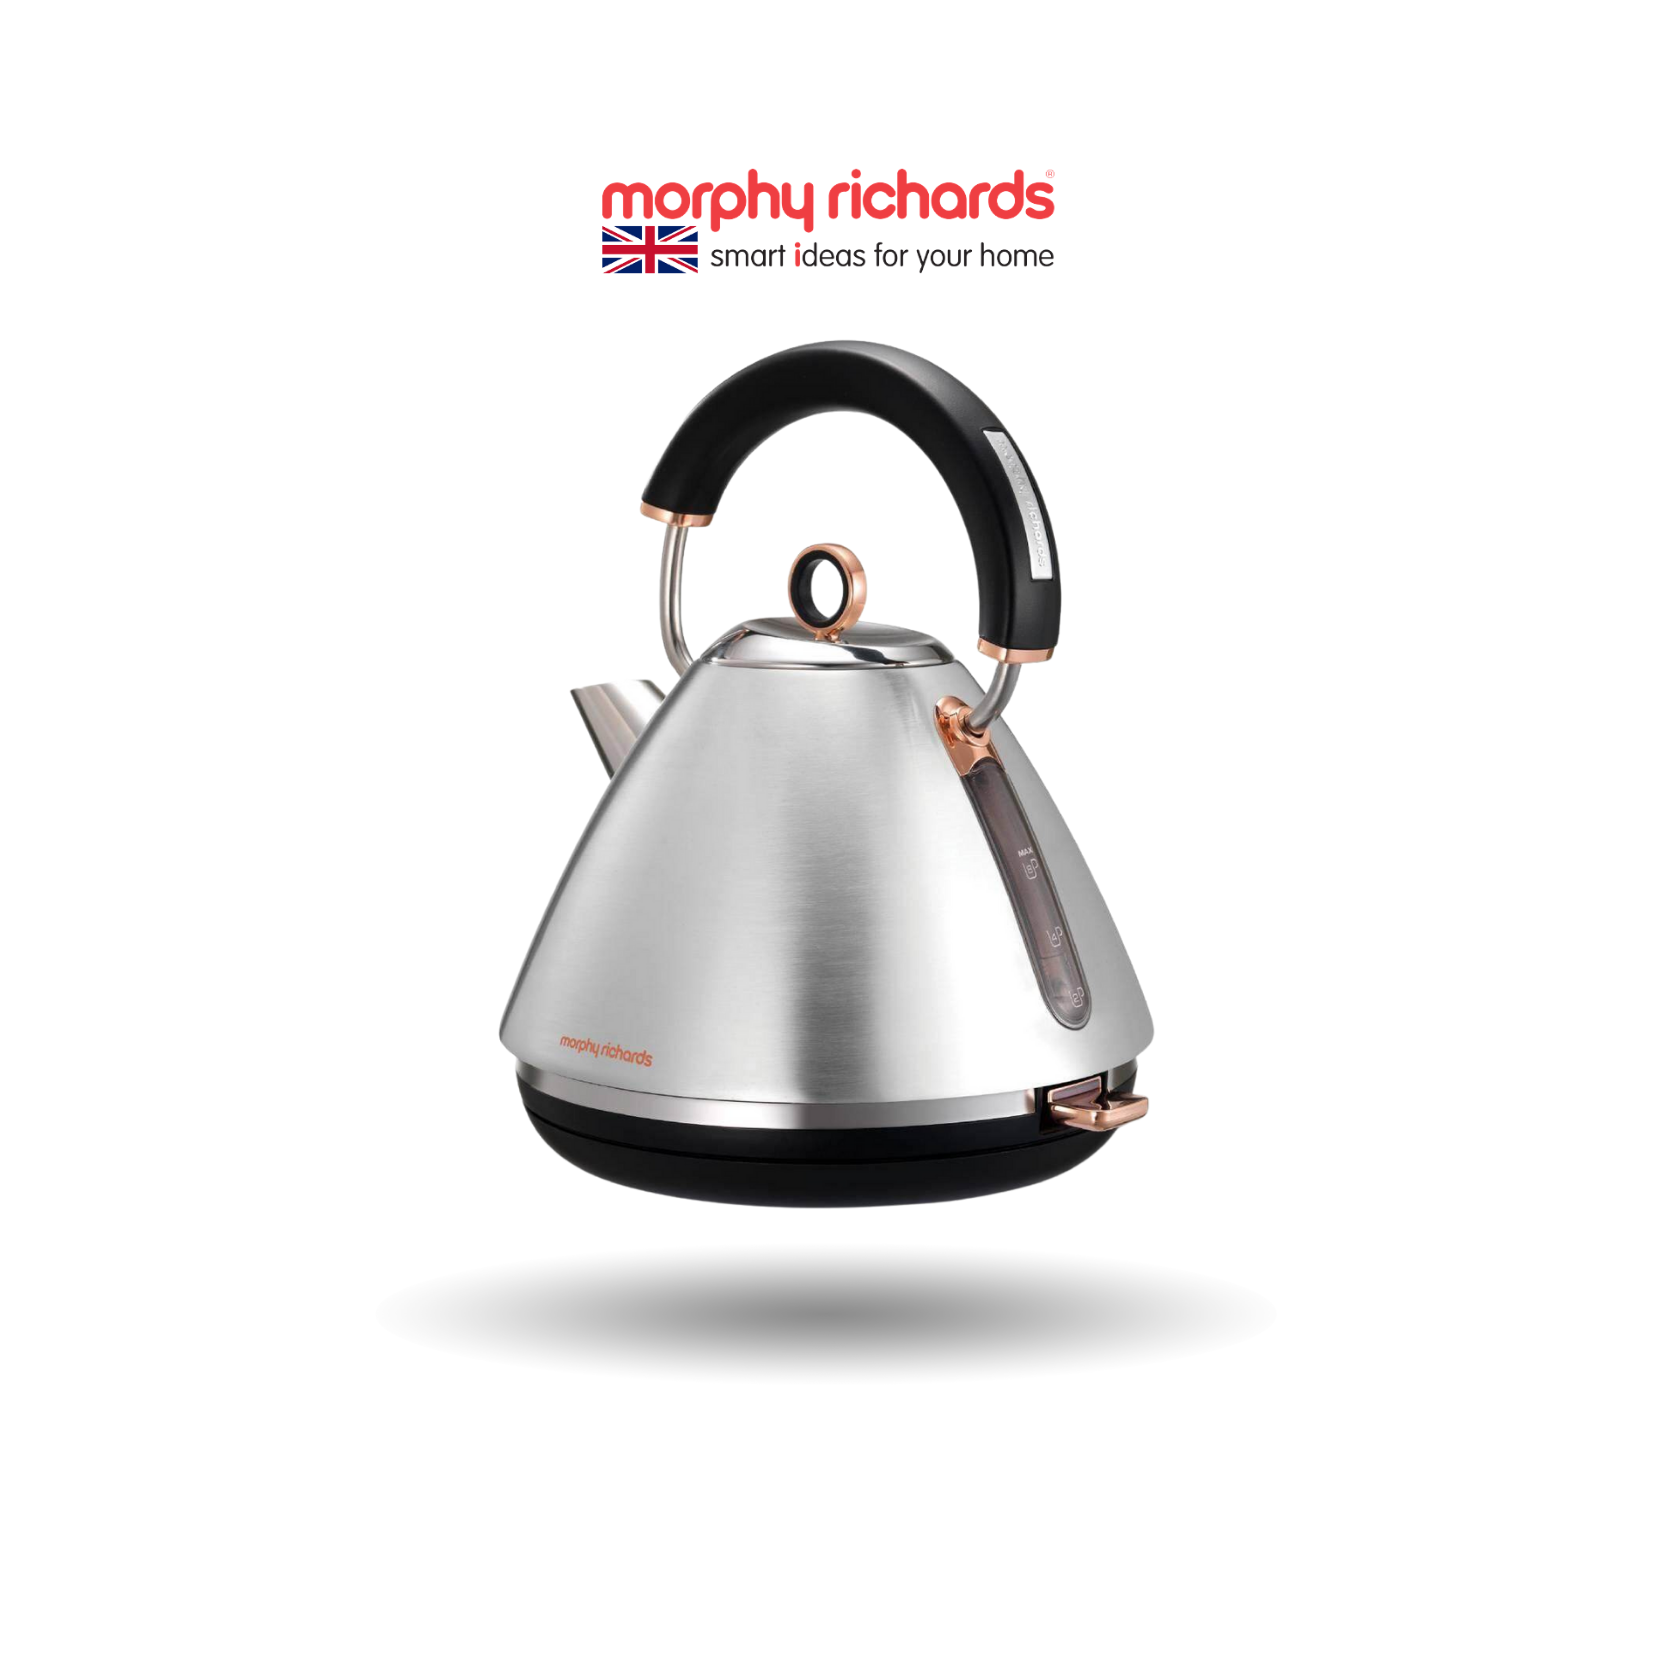 Morphy Richards Accents Rose Gold Kettle Brushed Metal - 1.5L Capacity | 2.2kw Power | Water Window